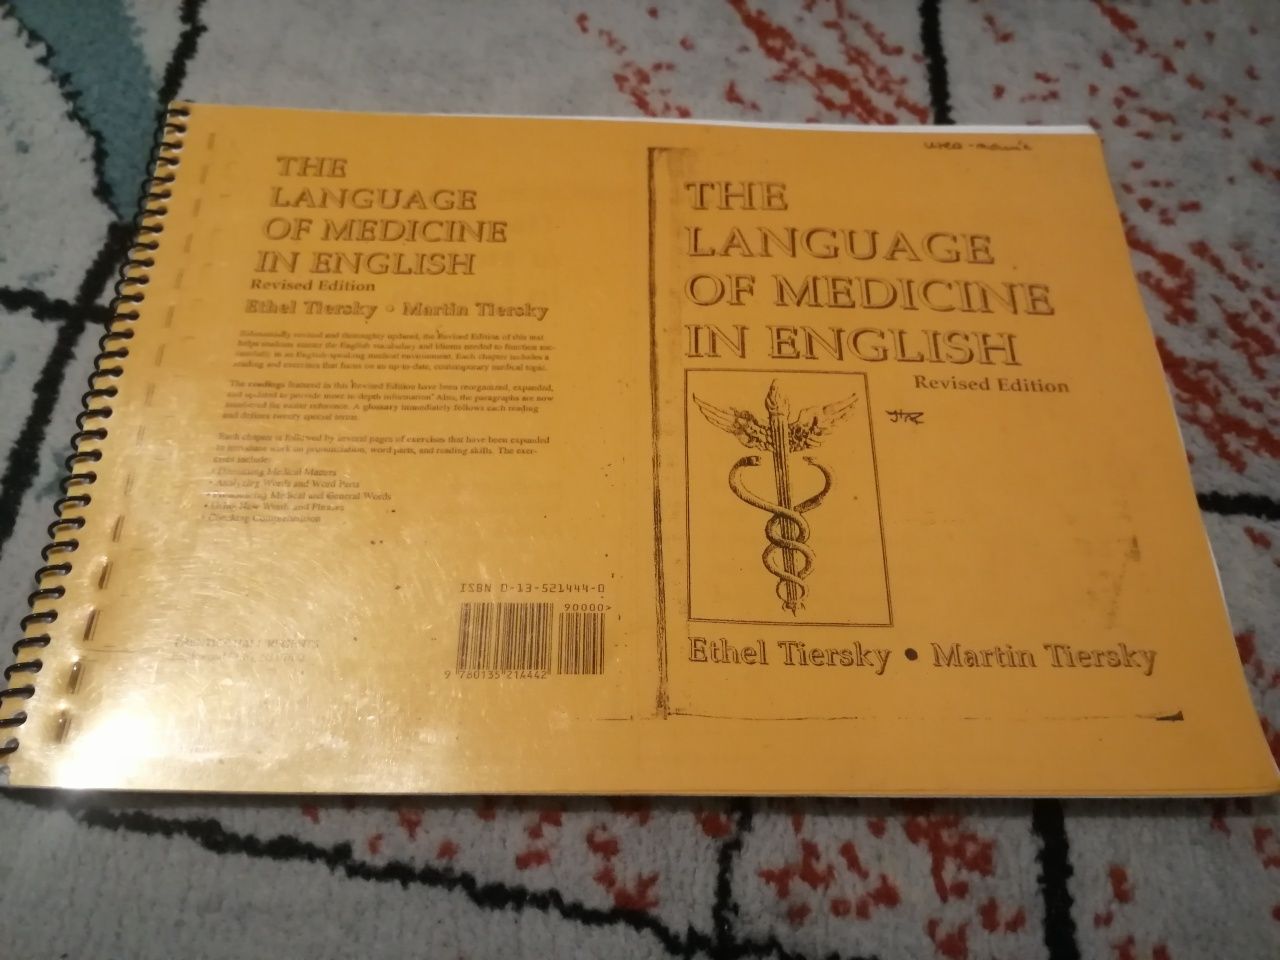 The language of medicine in english, Tiersky, Angielski Lublin